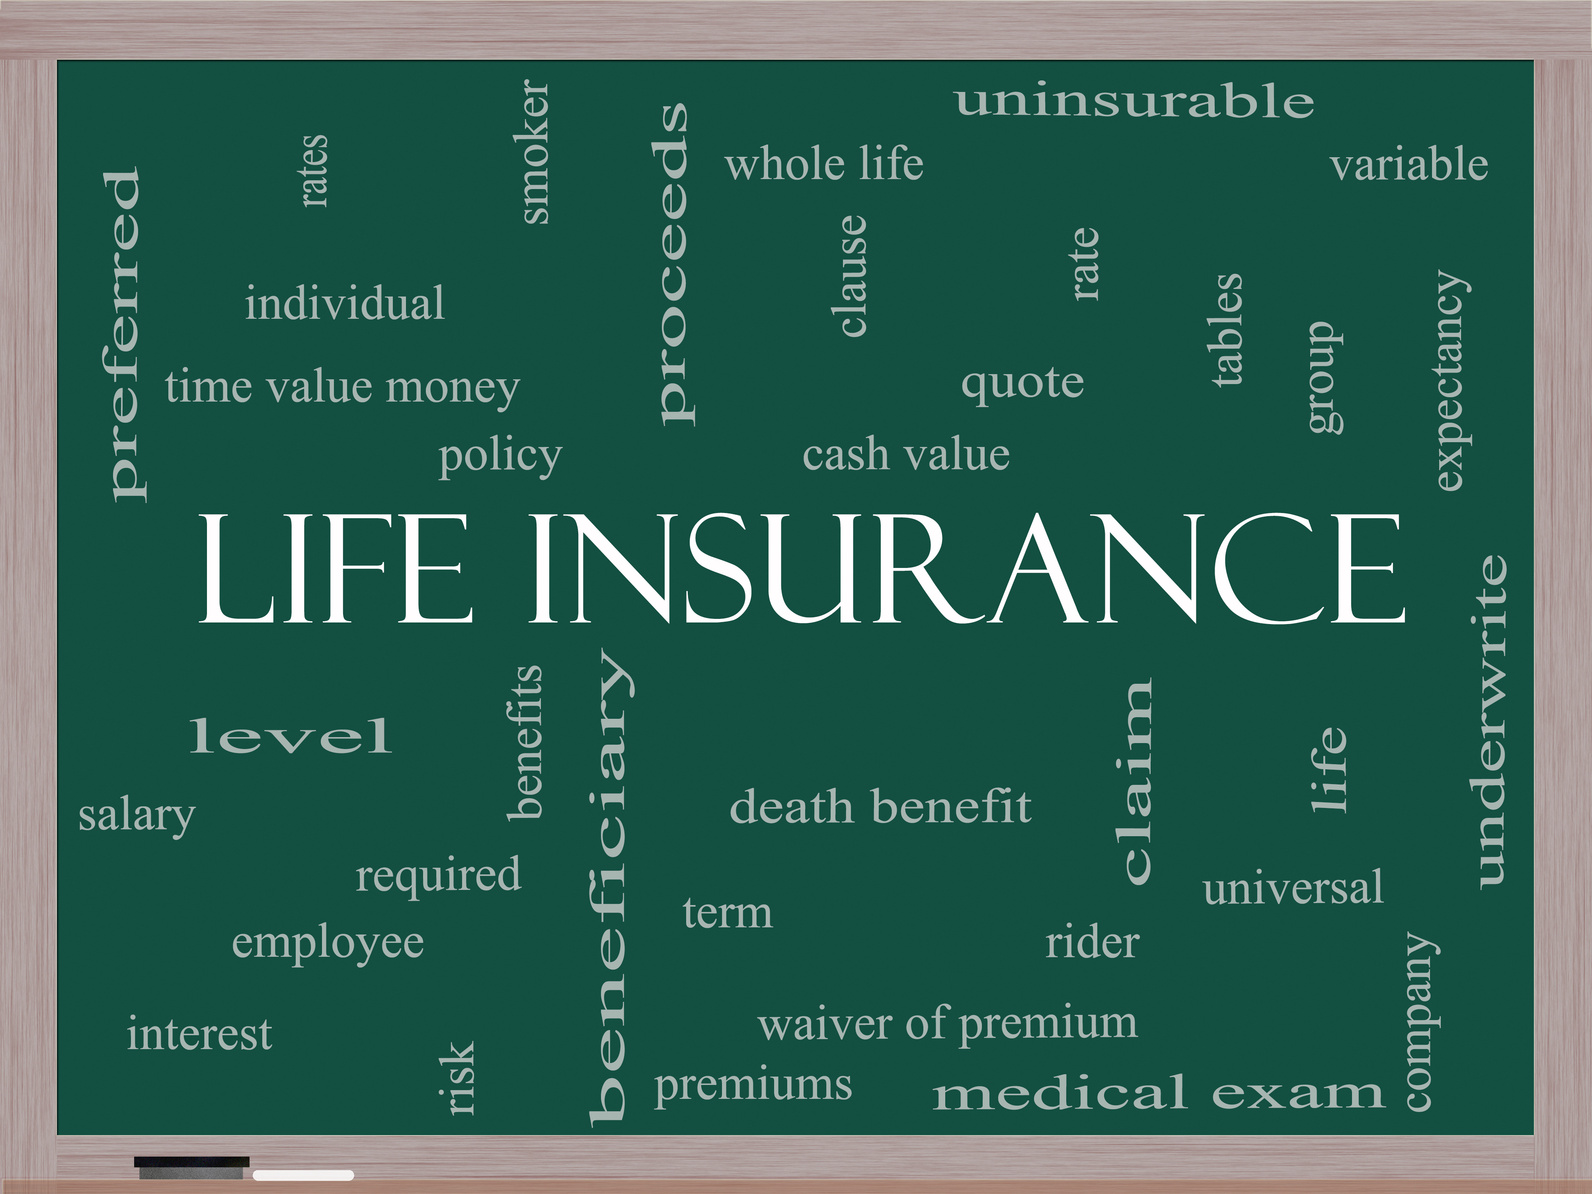 How To Make A Claim For A Life Insurance Policy